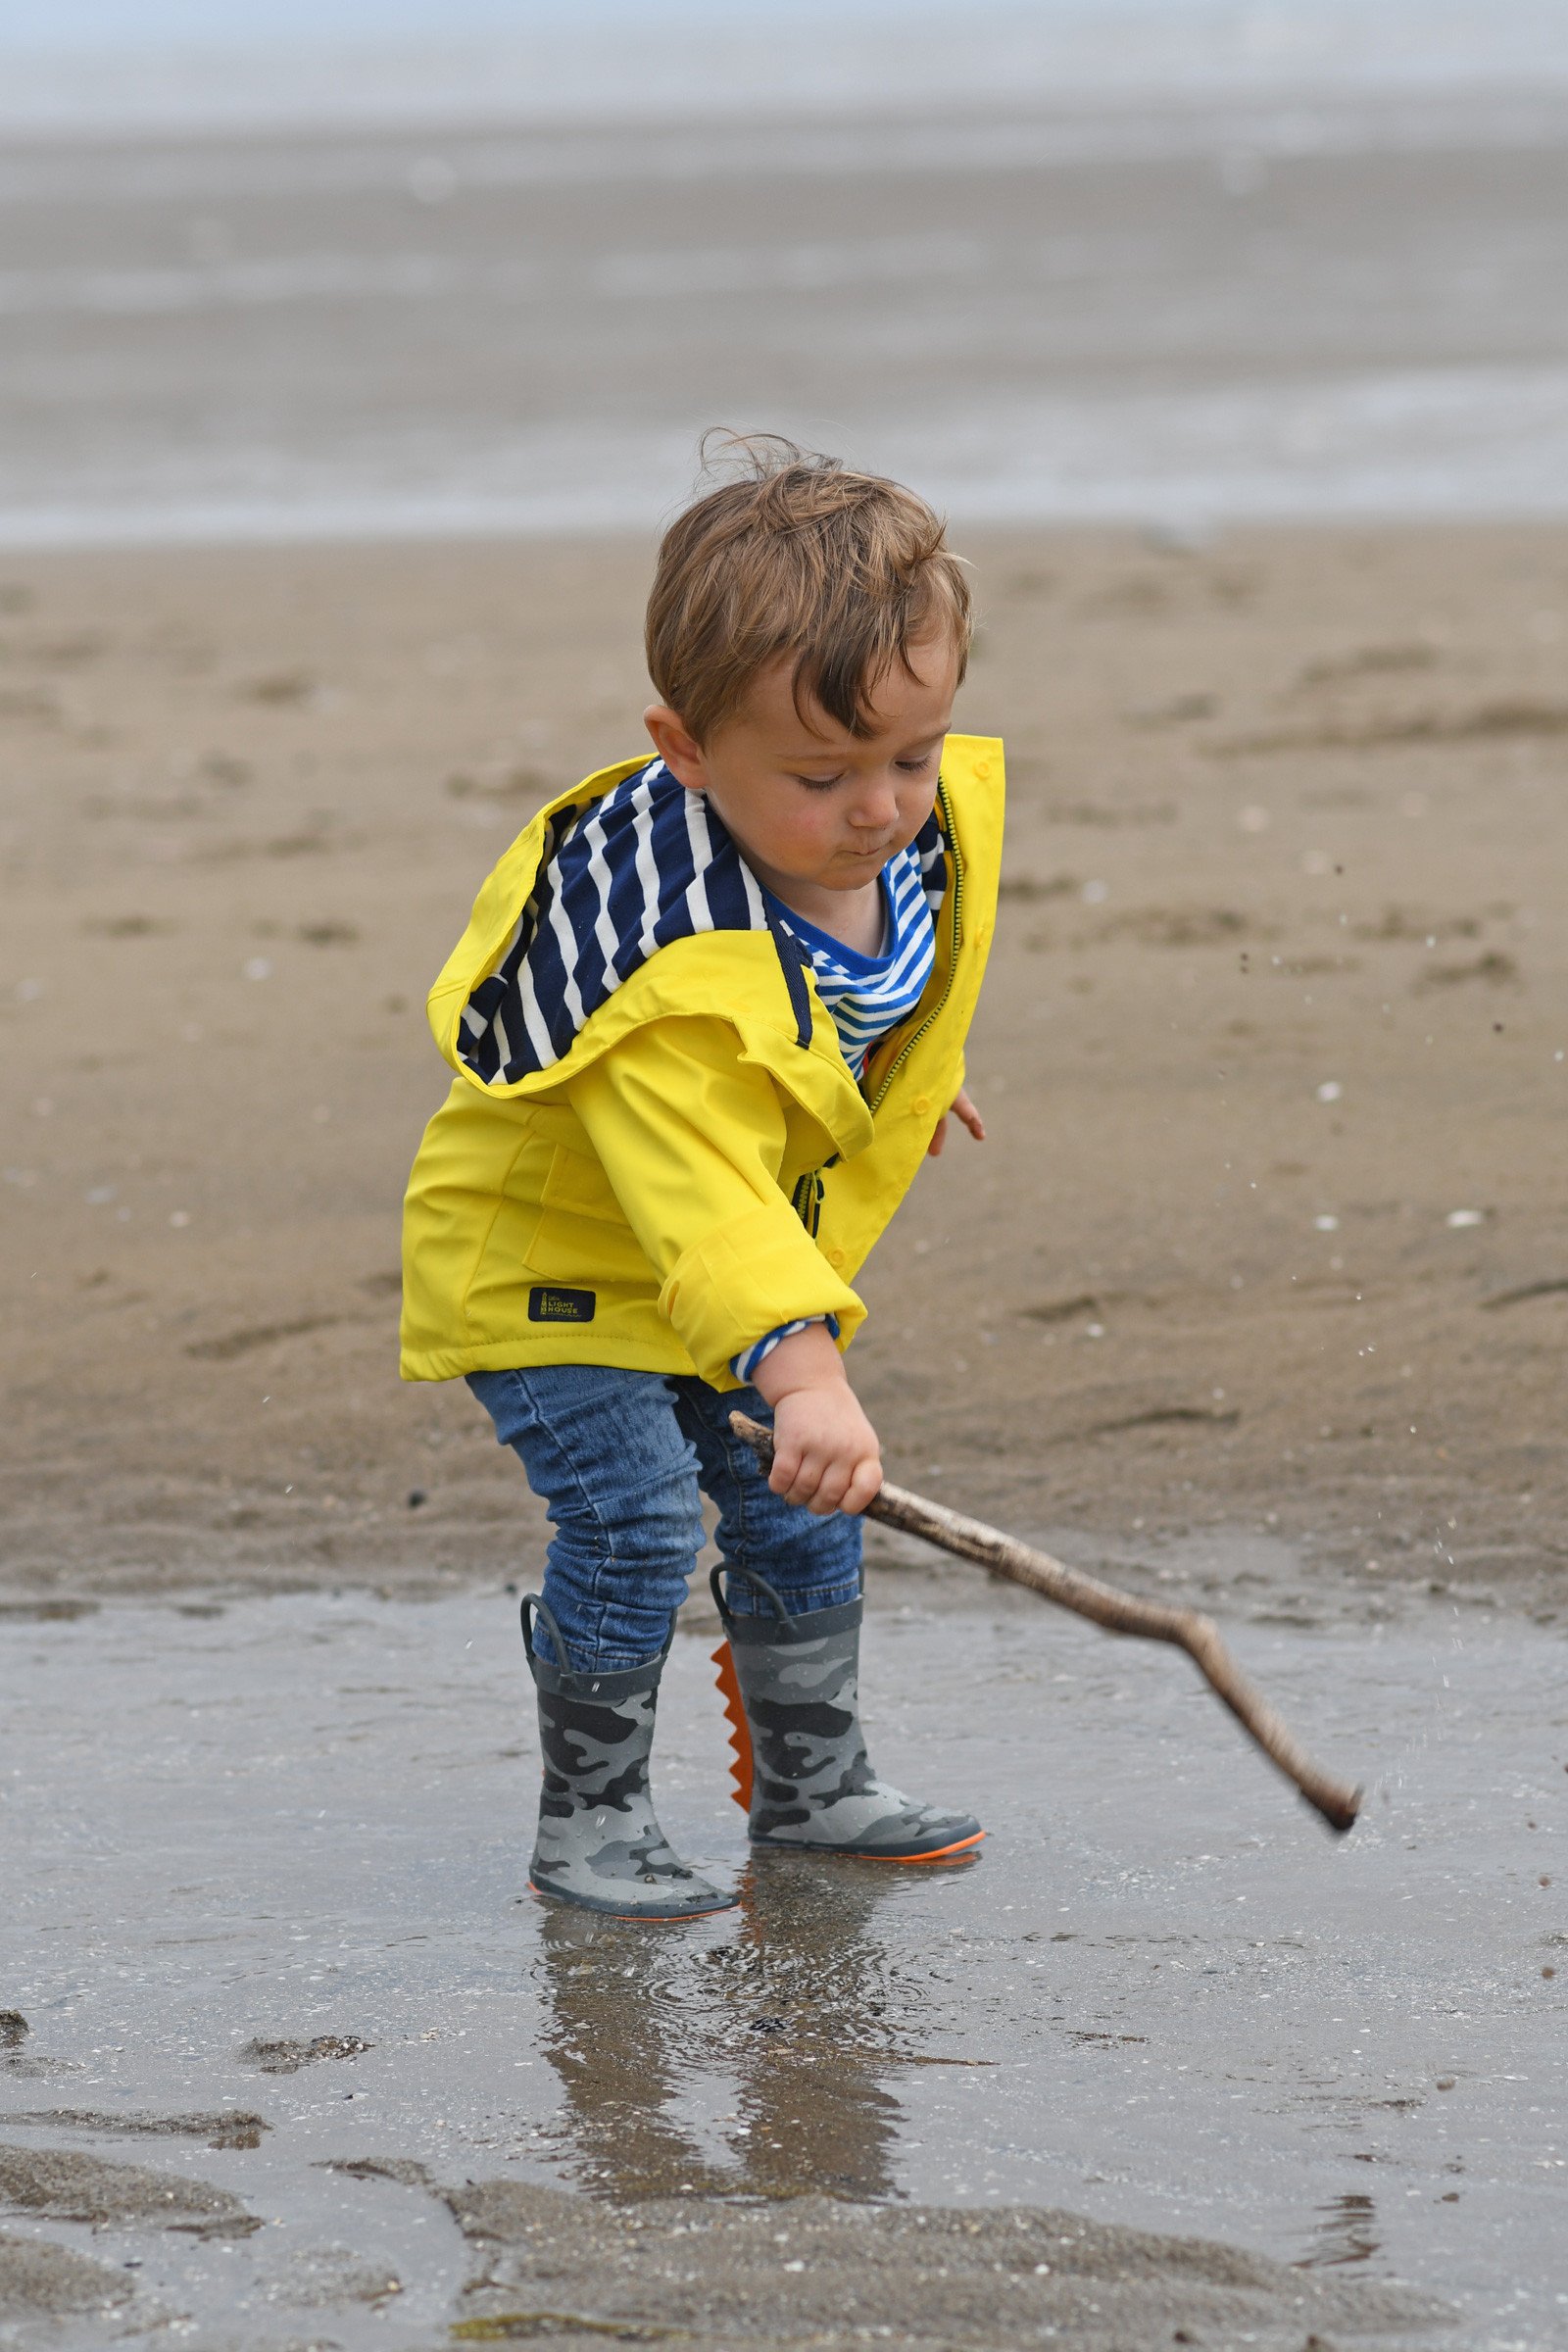 Max in his yellow raincoat on the beach